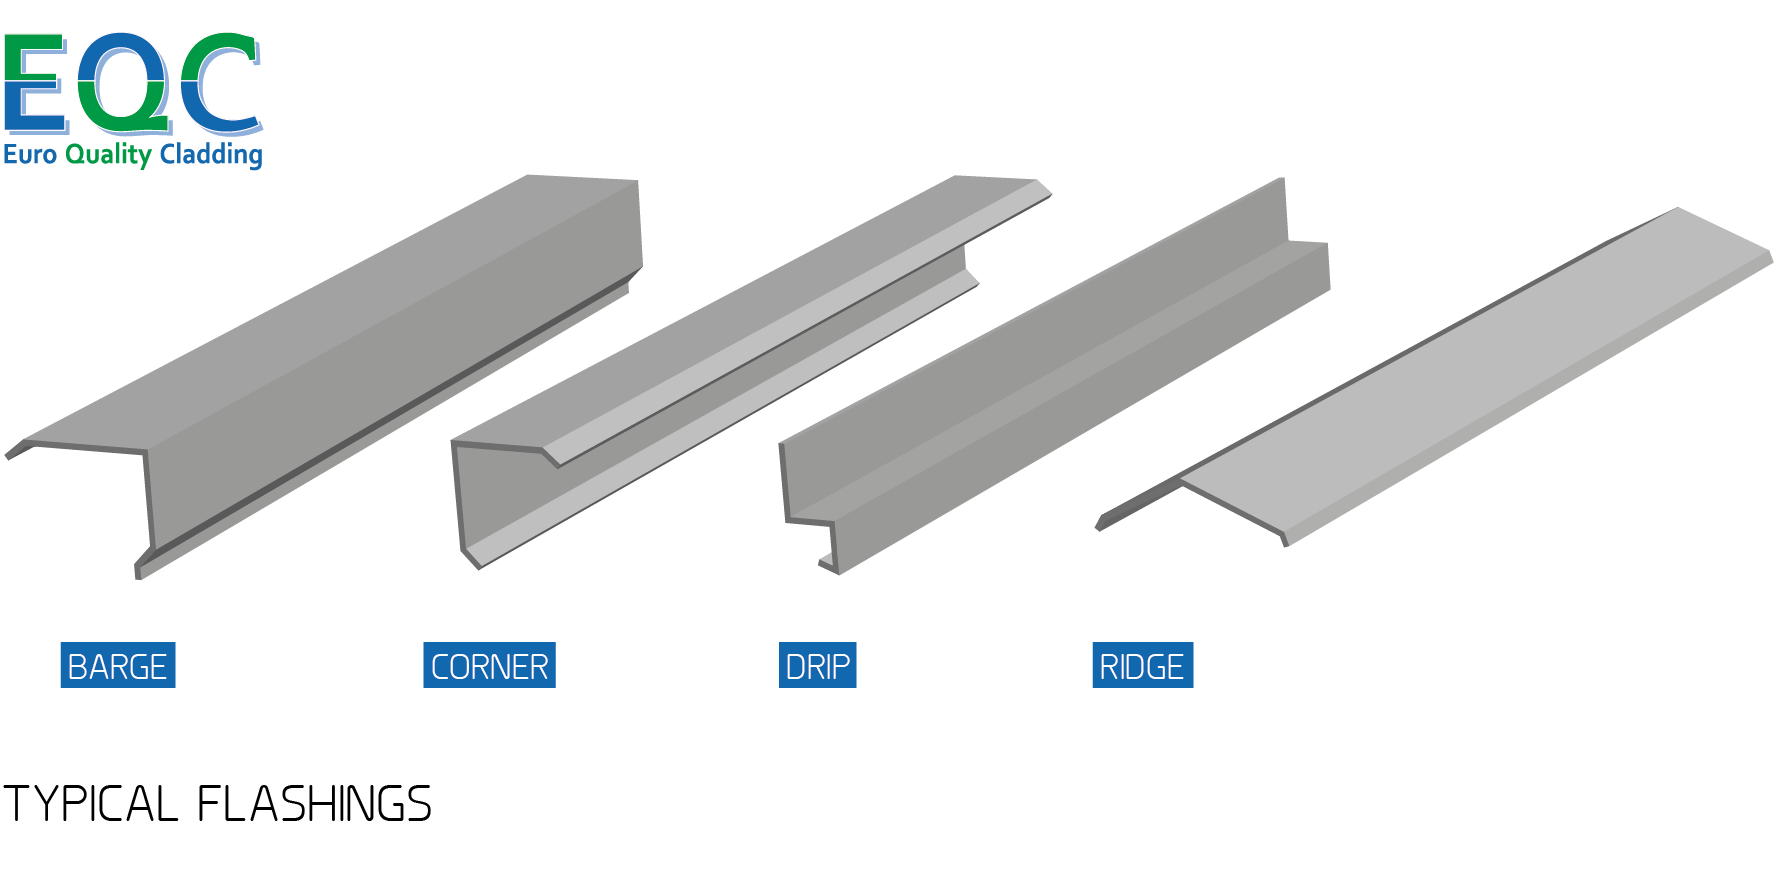 Metal flashings for roofs and walls from EQC Ireland